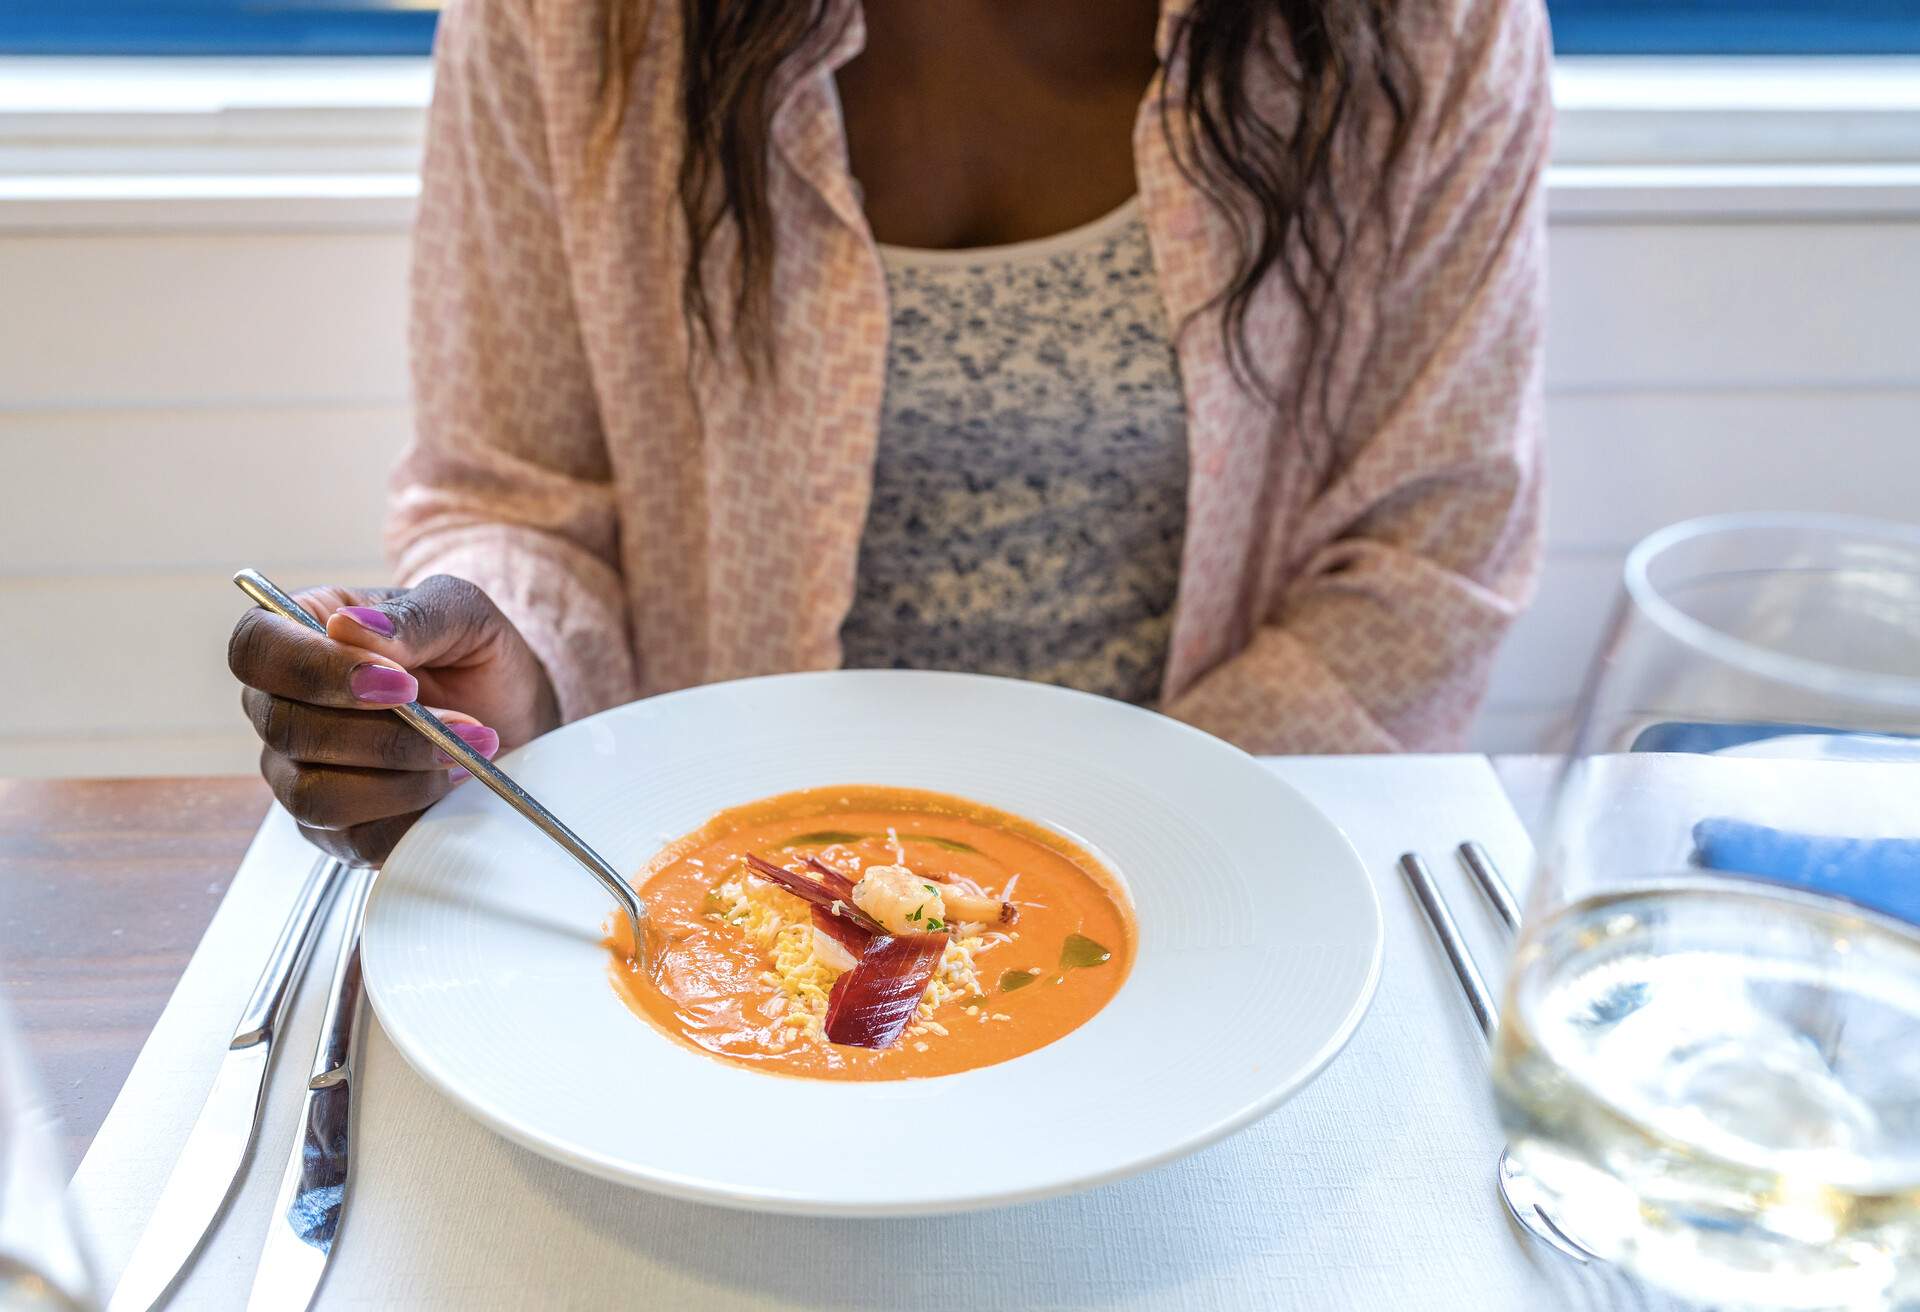 Close up view of a woman eating “salmorejo” in a restaurant. Typical Spanish food